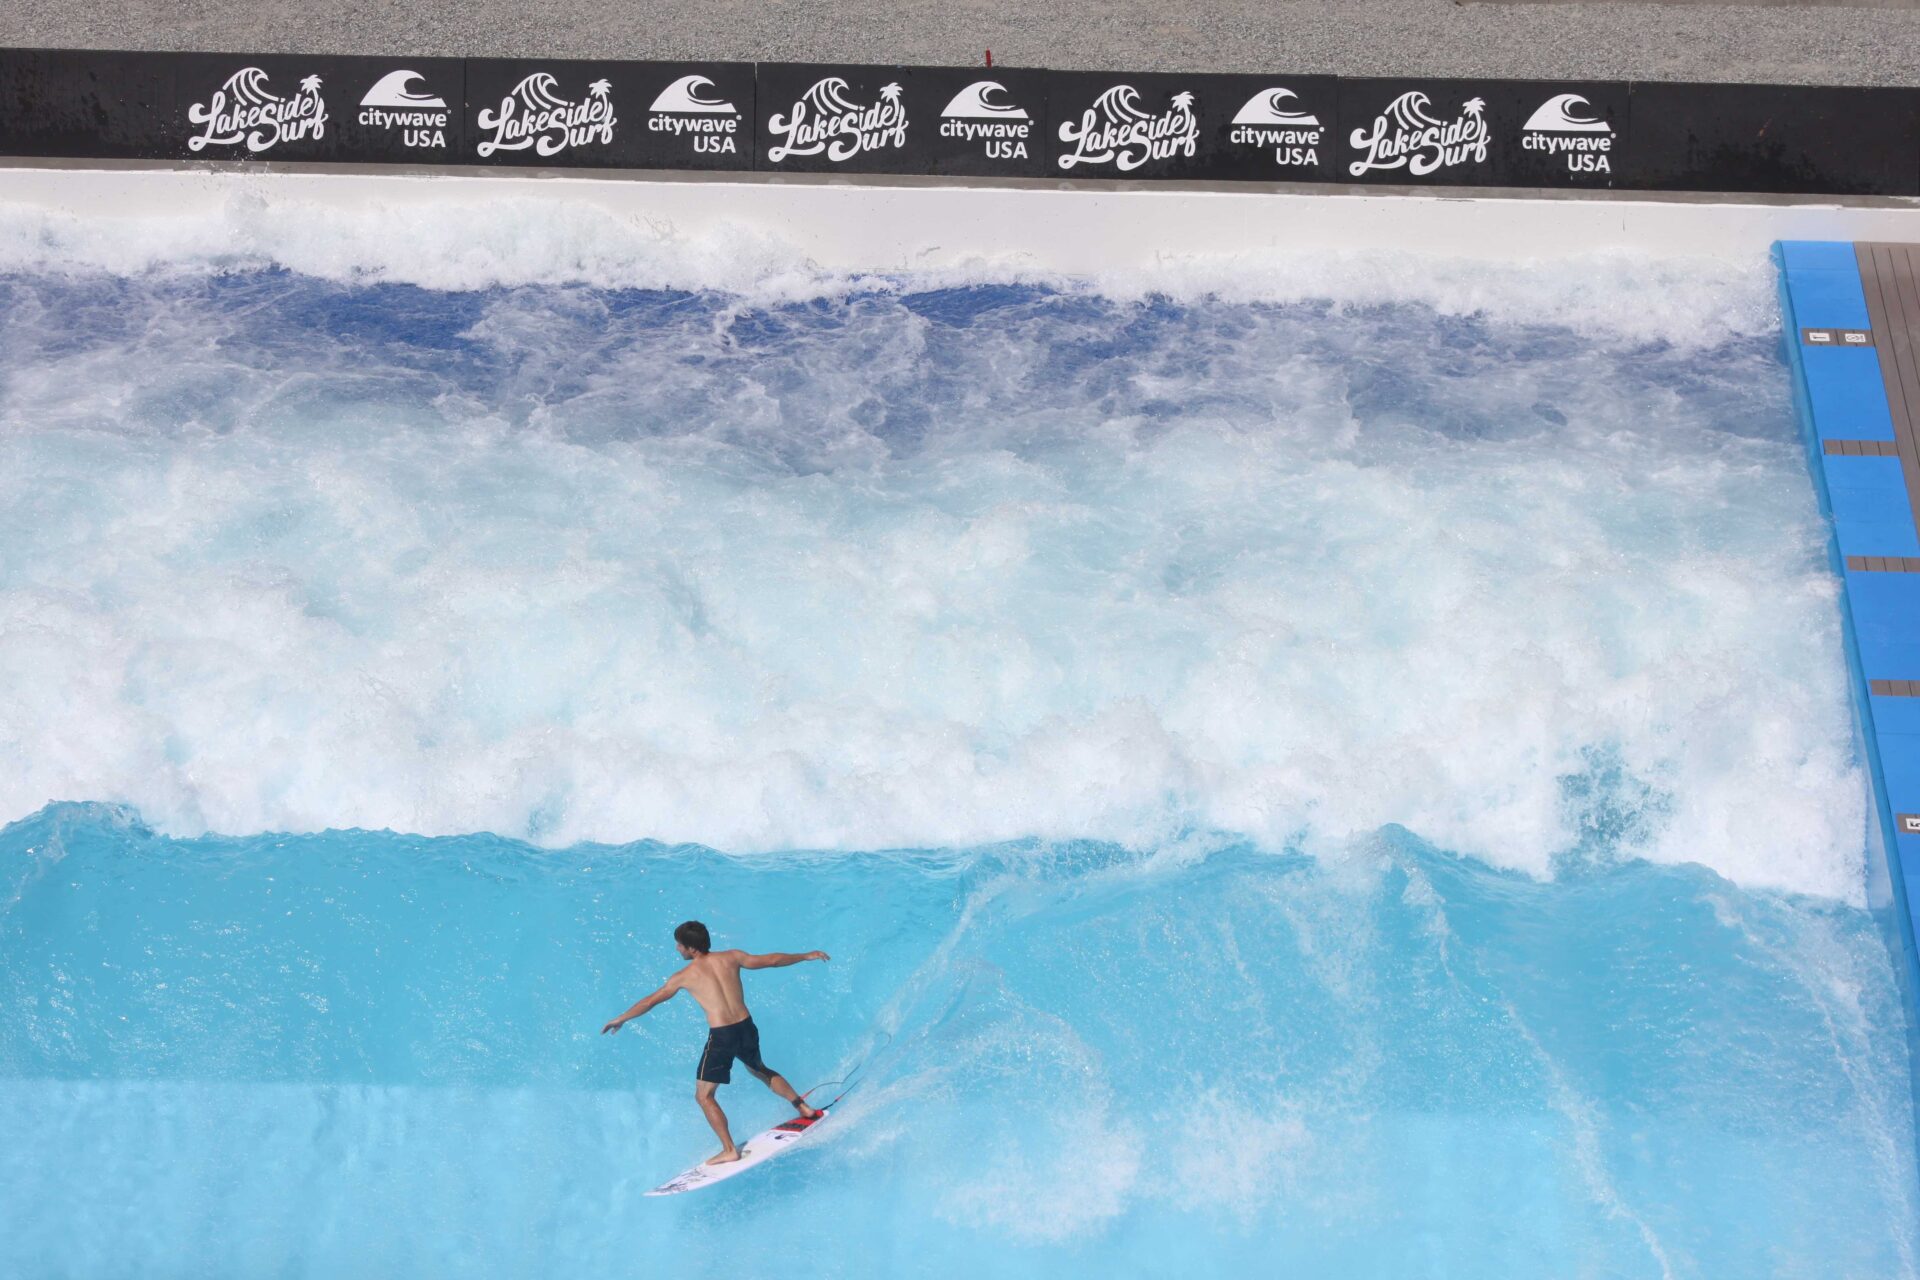 Man surfing a wave, Lakeside Surf, at Slidewaters Waterpark in Chelan, Washington.